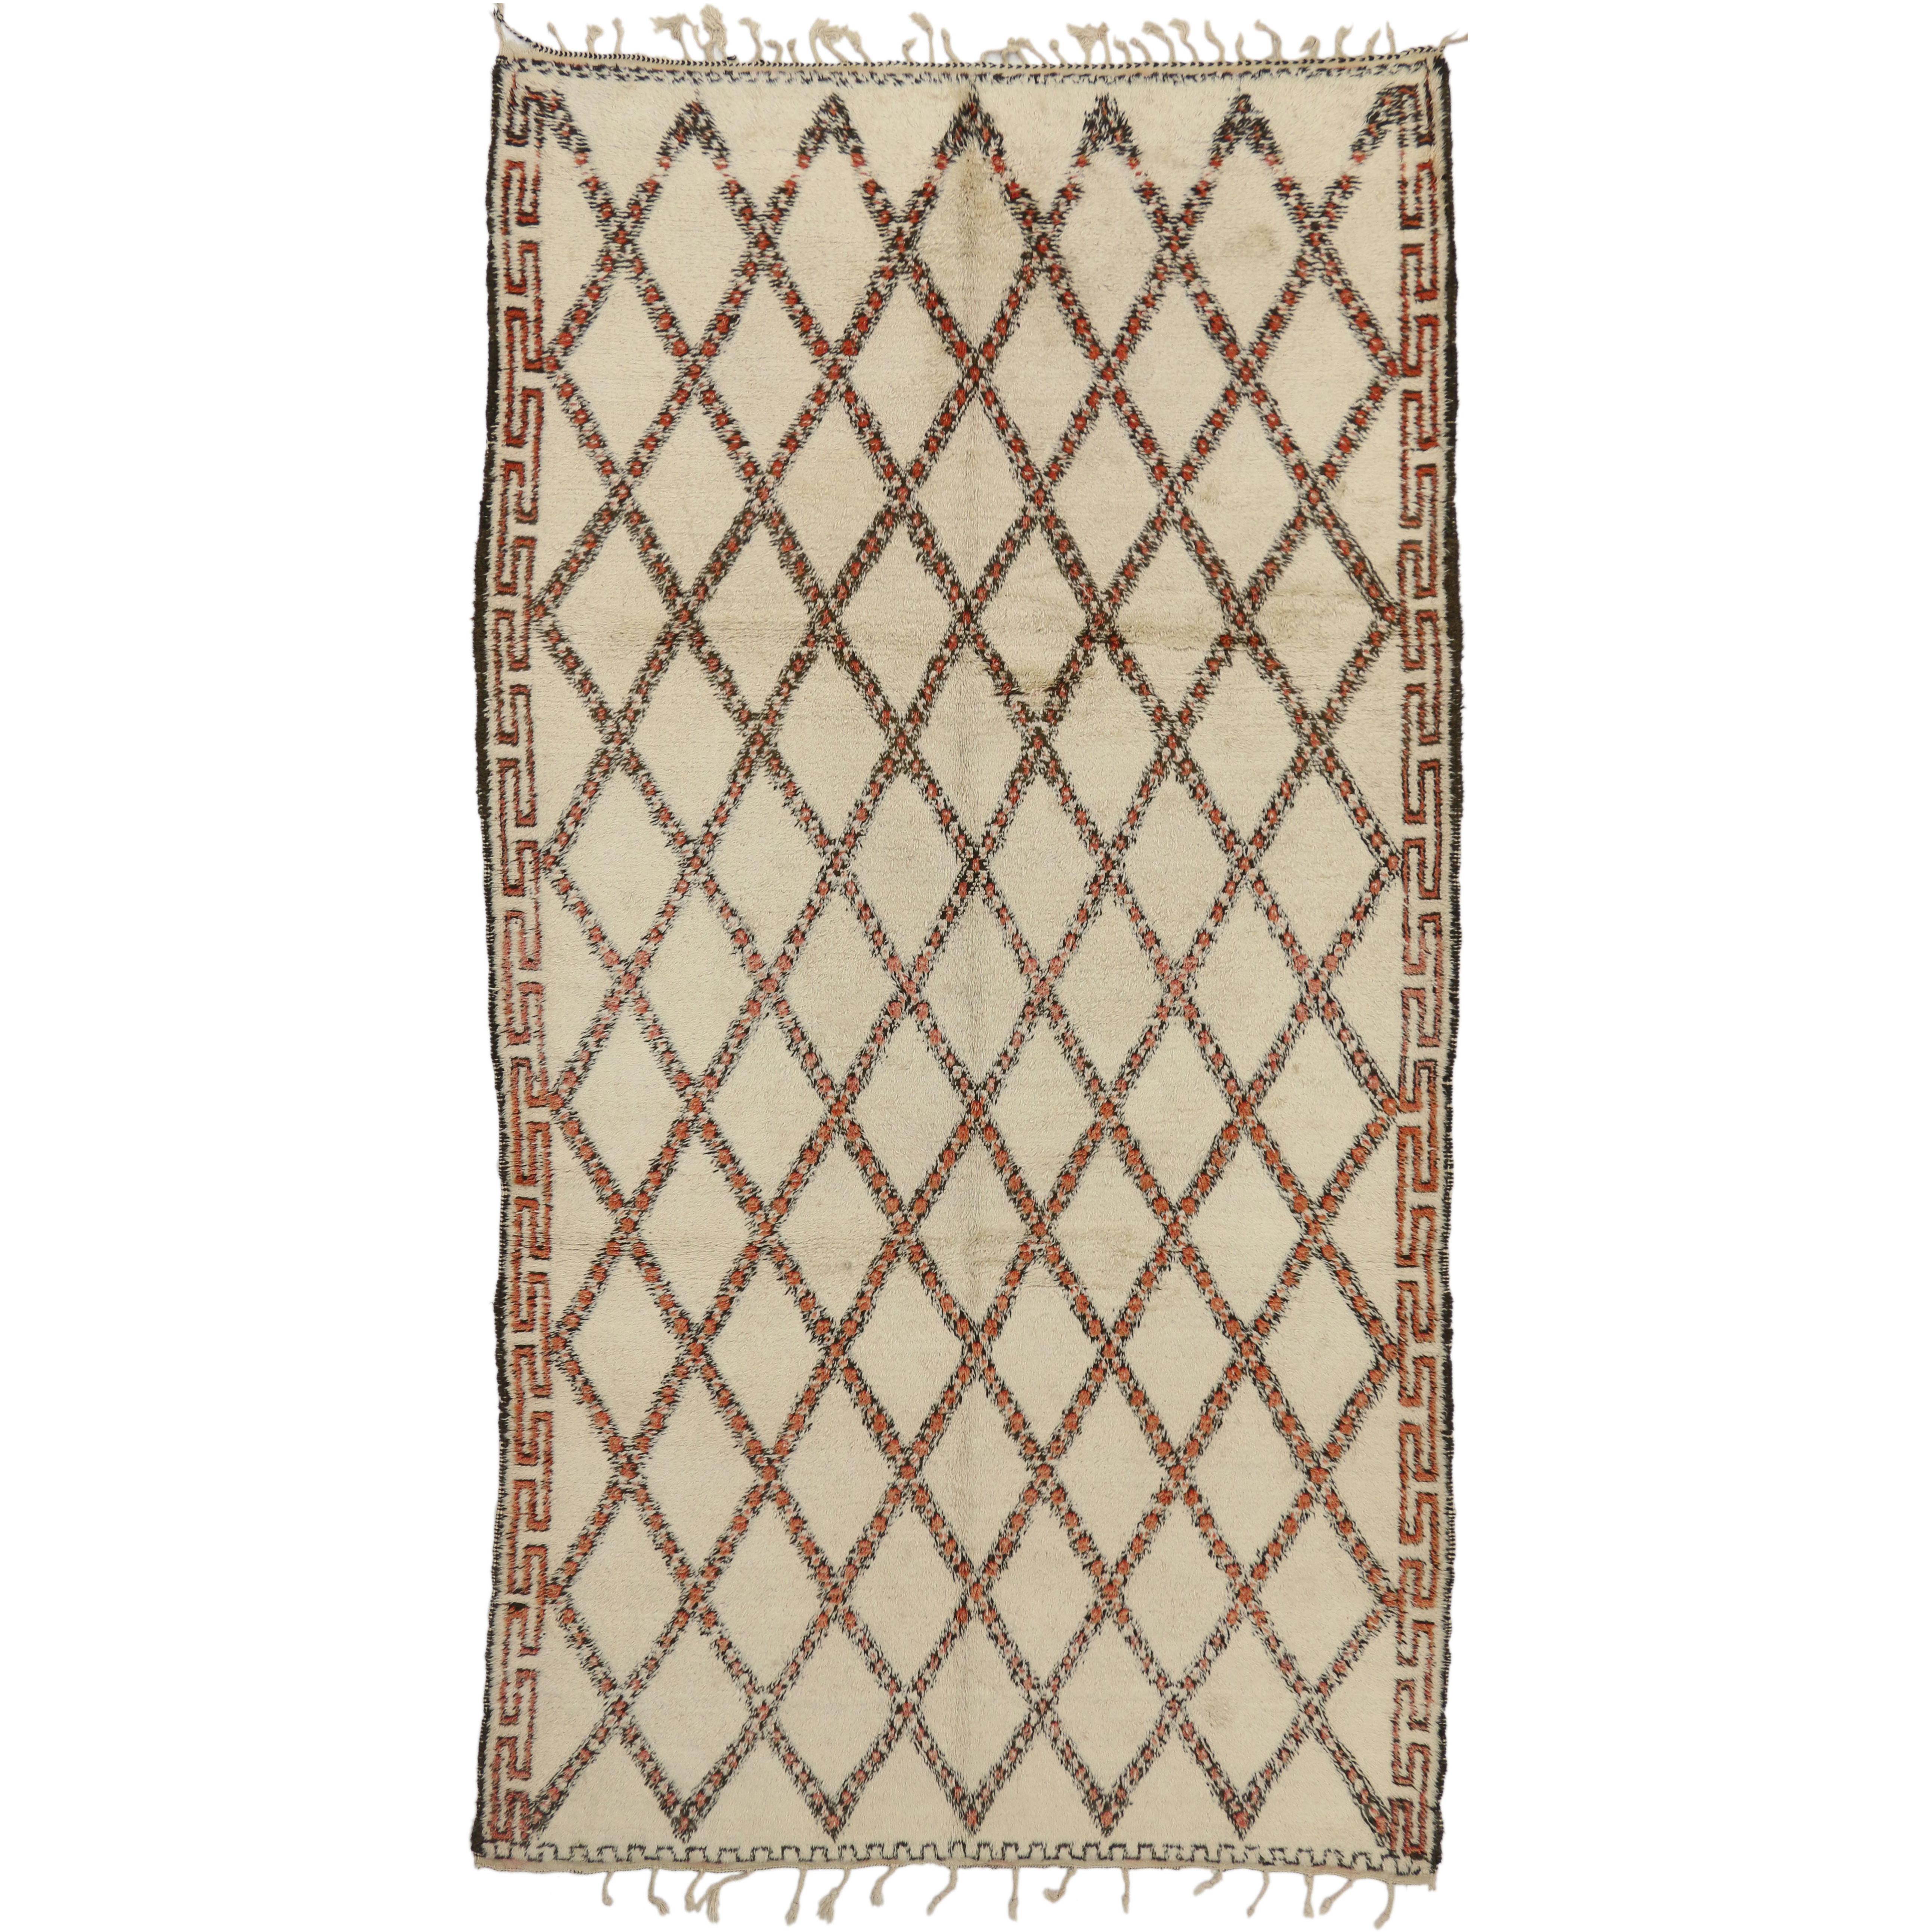 Vintage Beni Ourain Moroccan Rug with Modern Bauhaus Style and Hygge Vibes